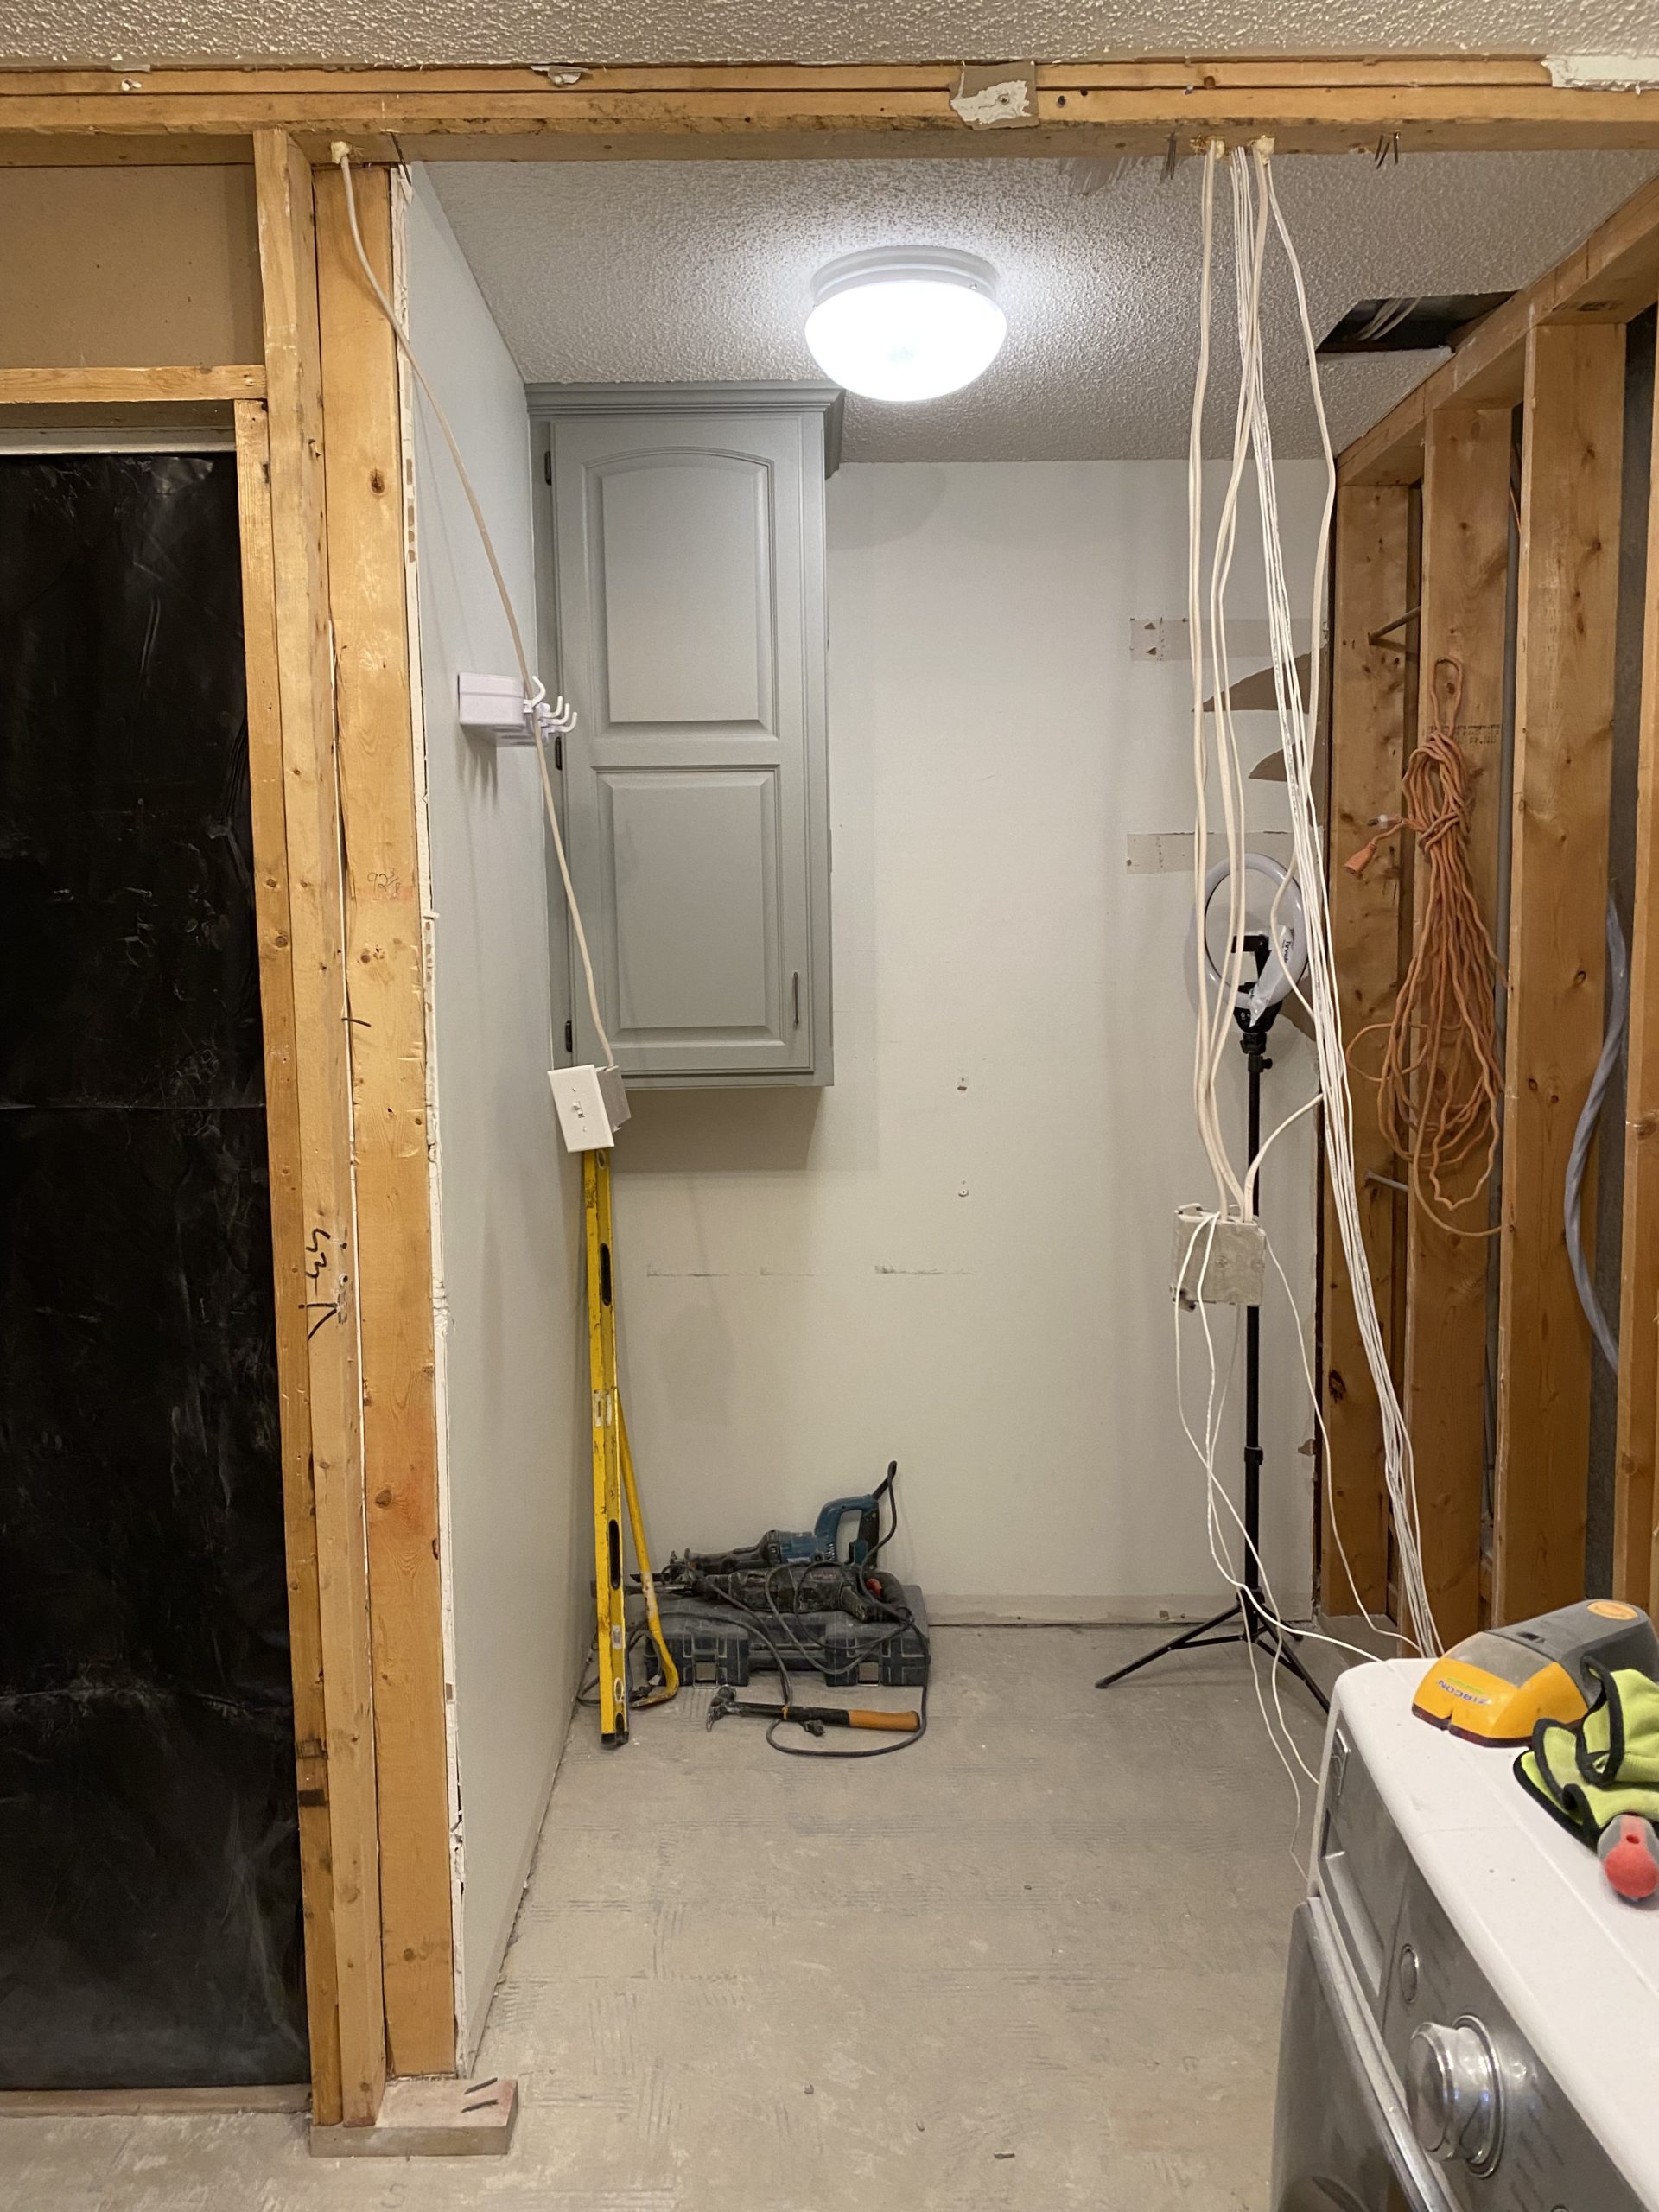 Our Laundry & Mudroom Reveal | Under Construction